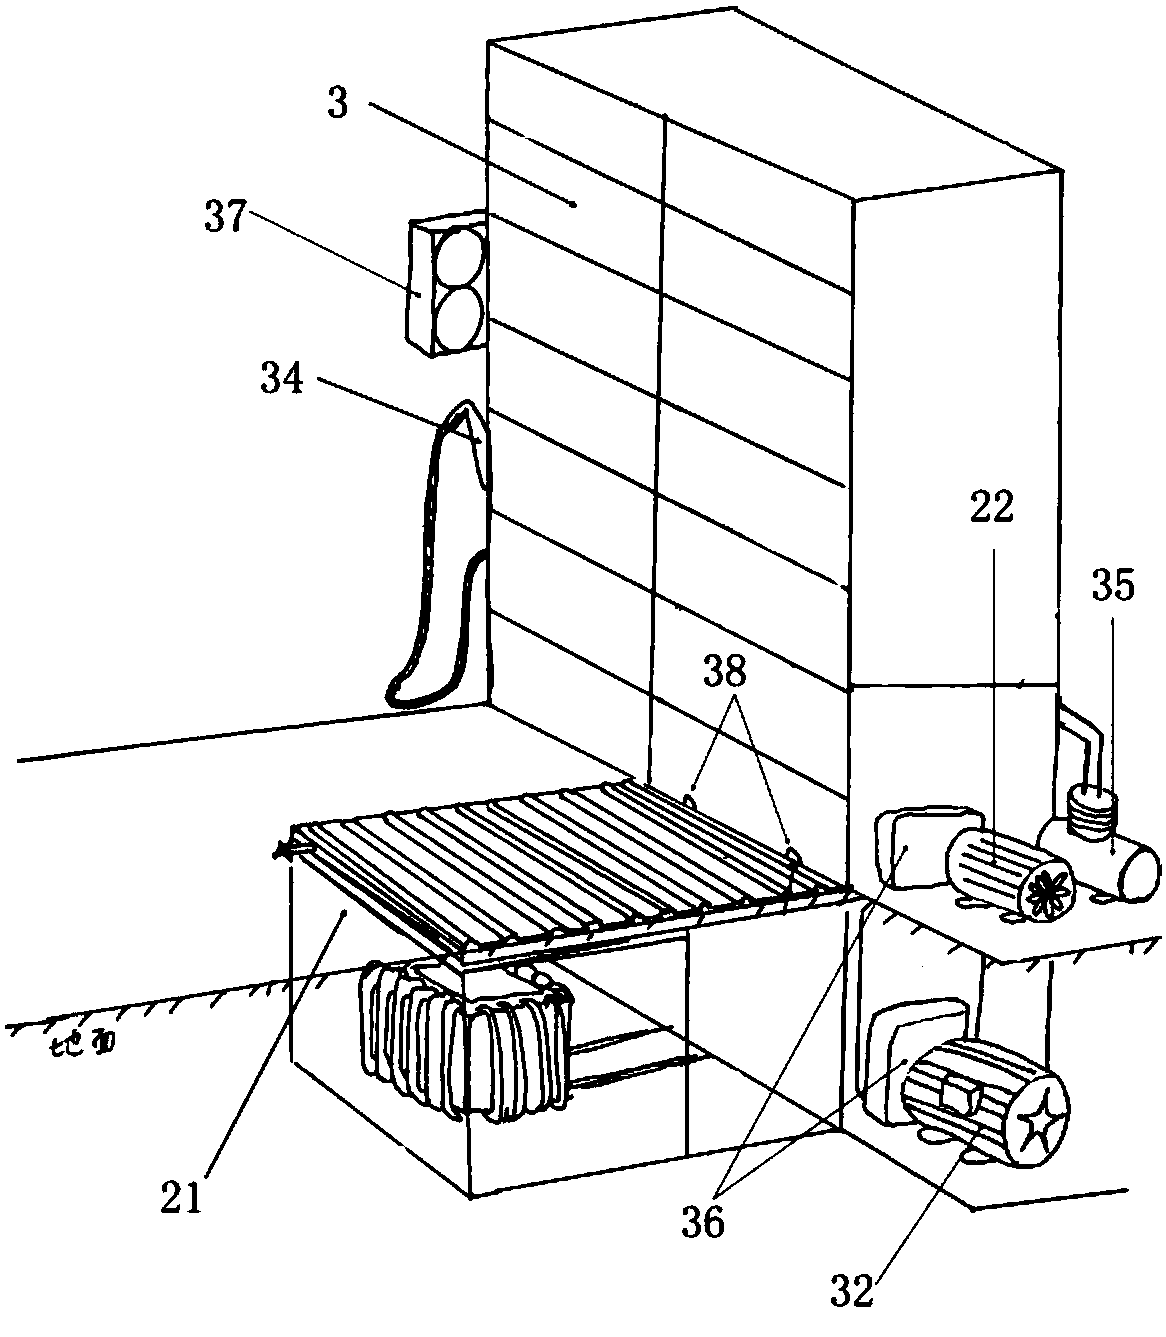 Electric vehicle battery replacement system and method